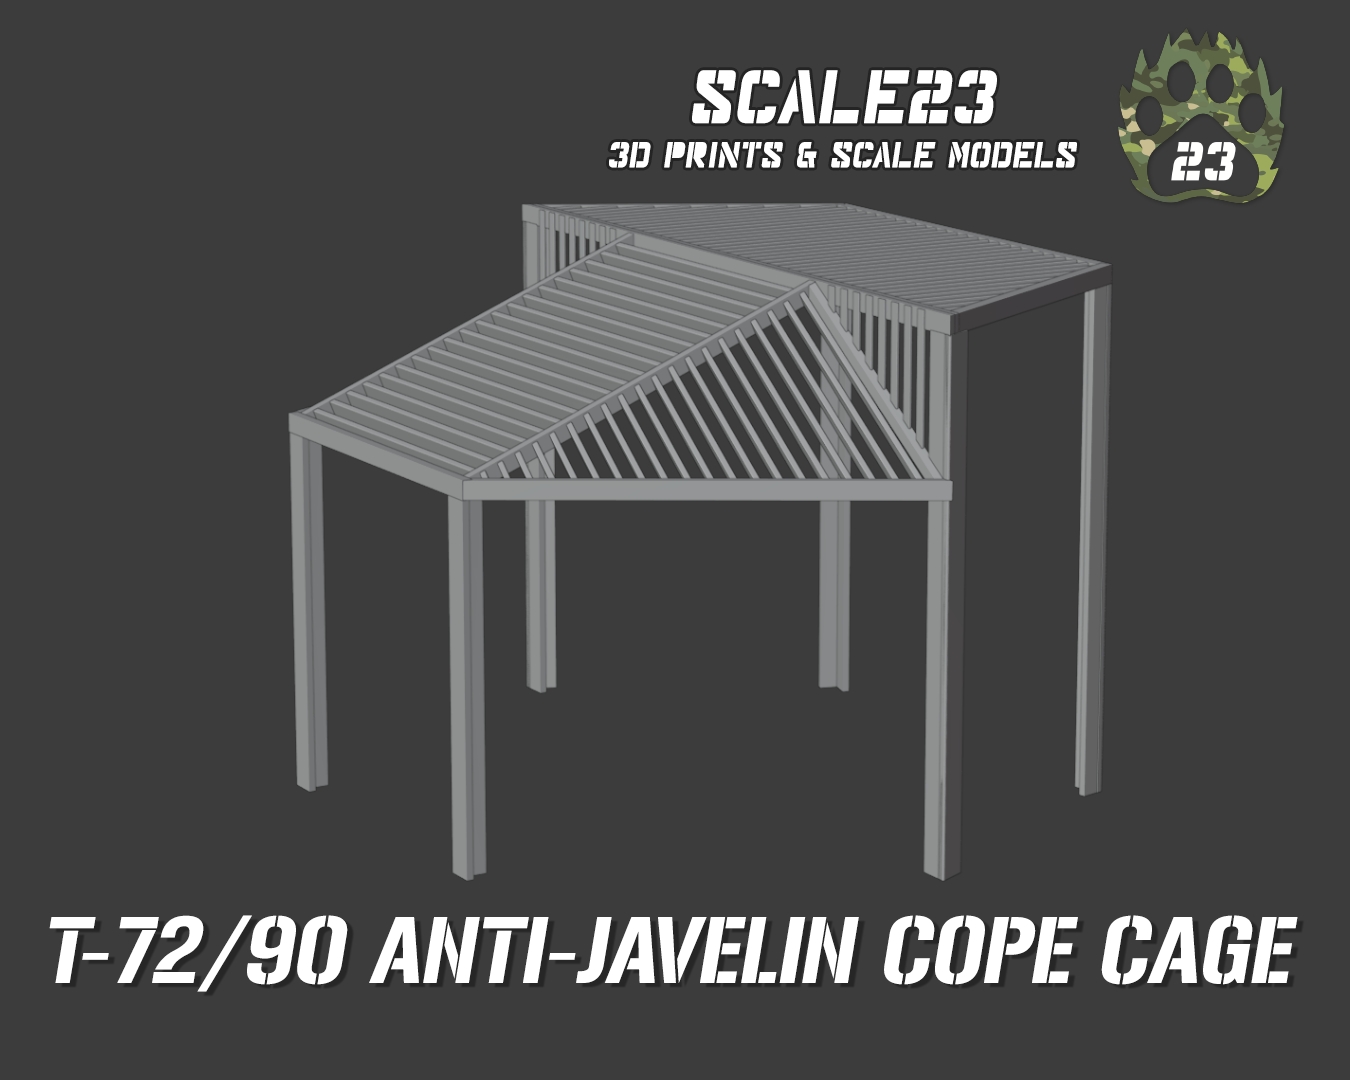 Anti-Javelin Cope Cage for T-72/80/90